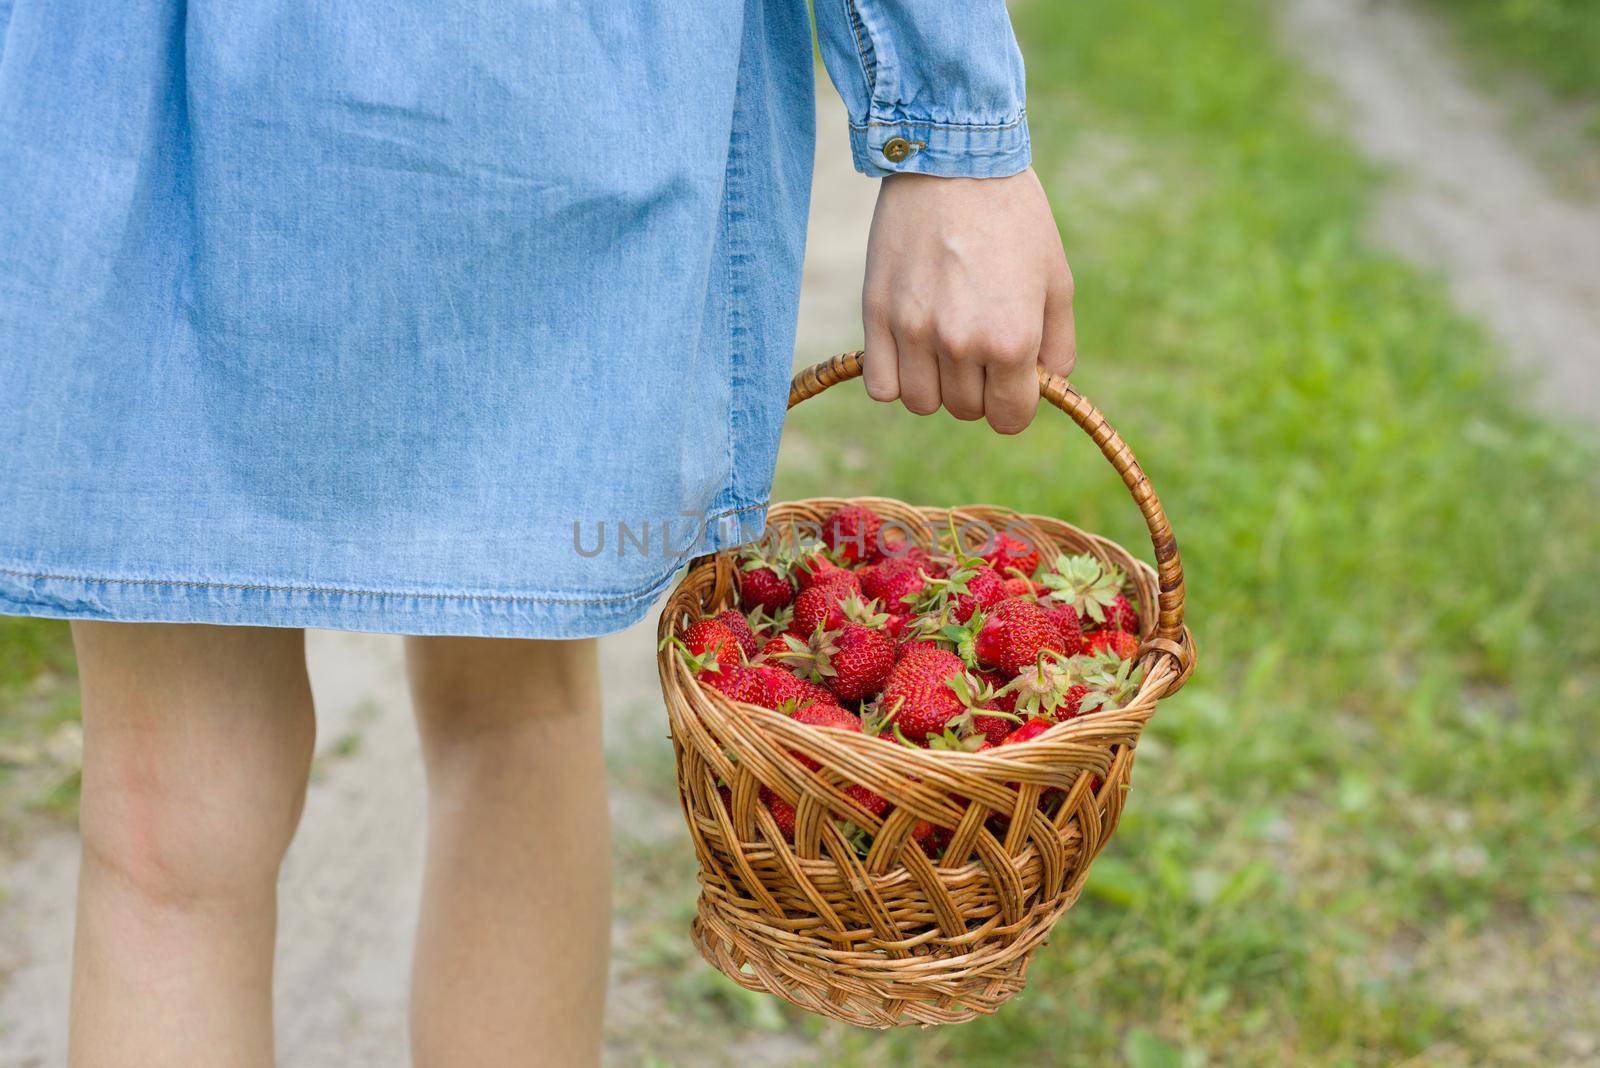 Basket with strawberries in a woman's hand. Background forest rural road.